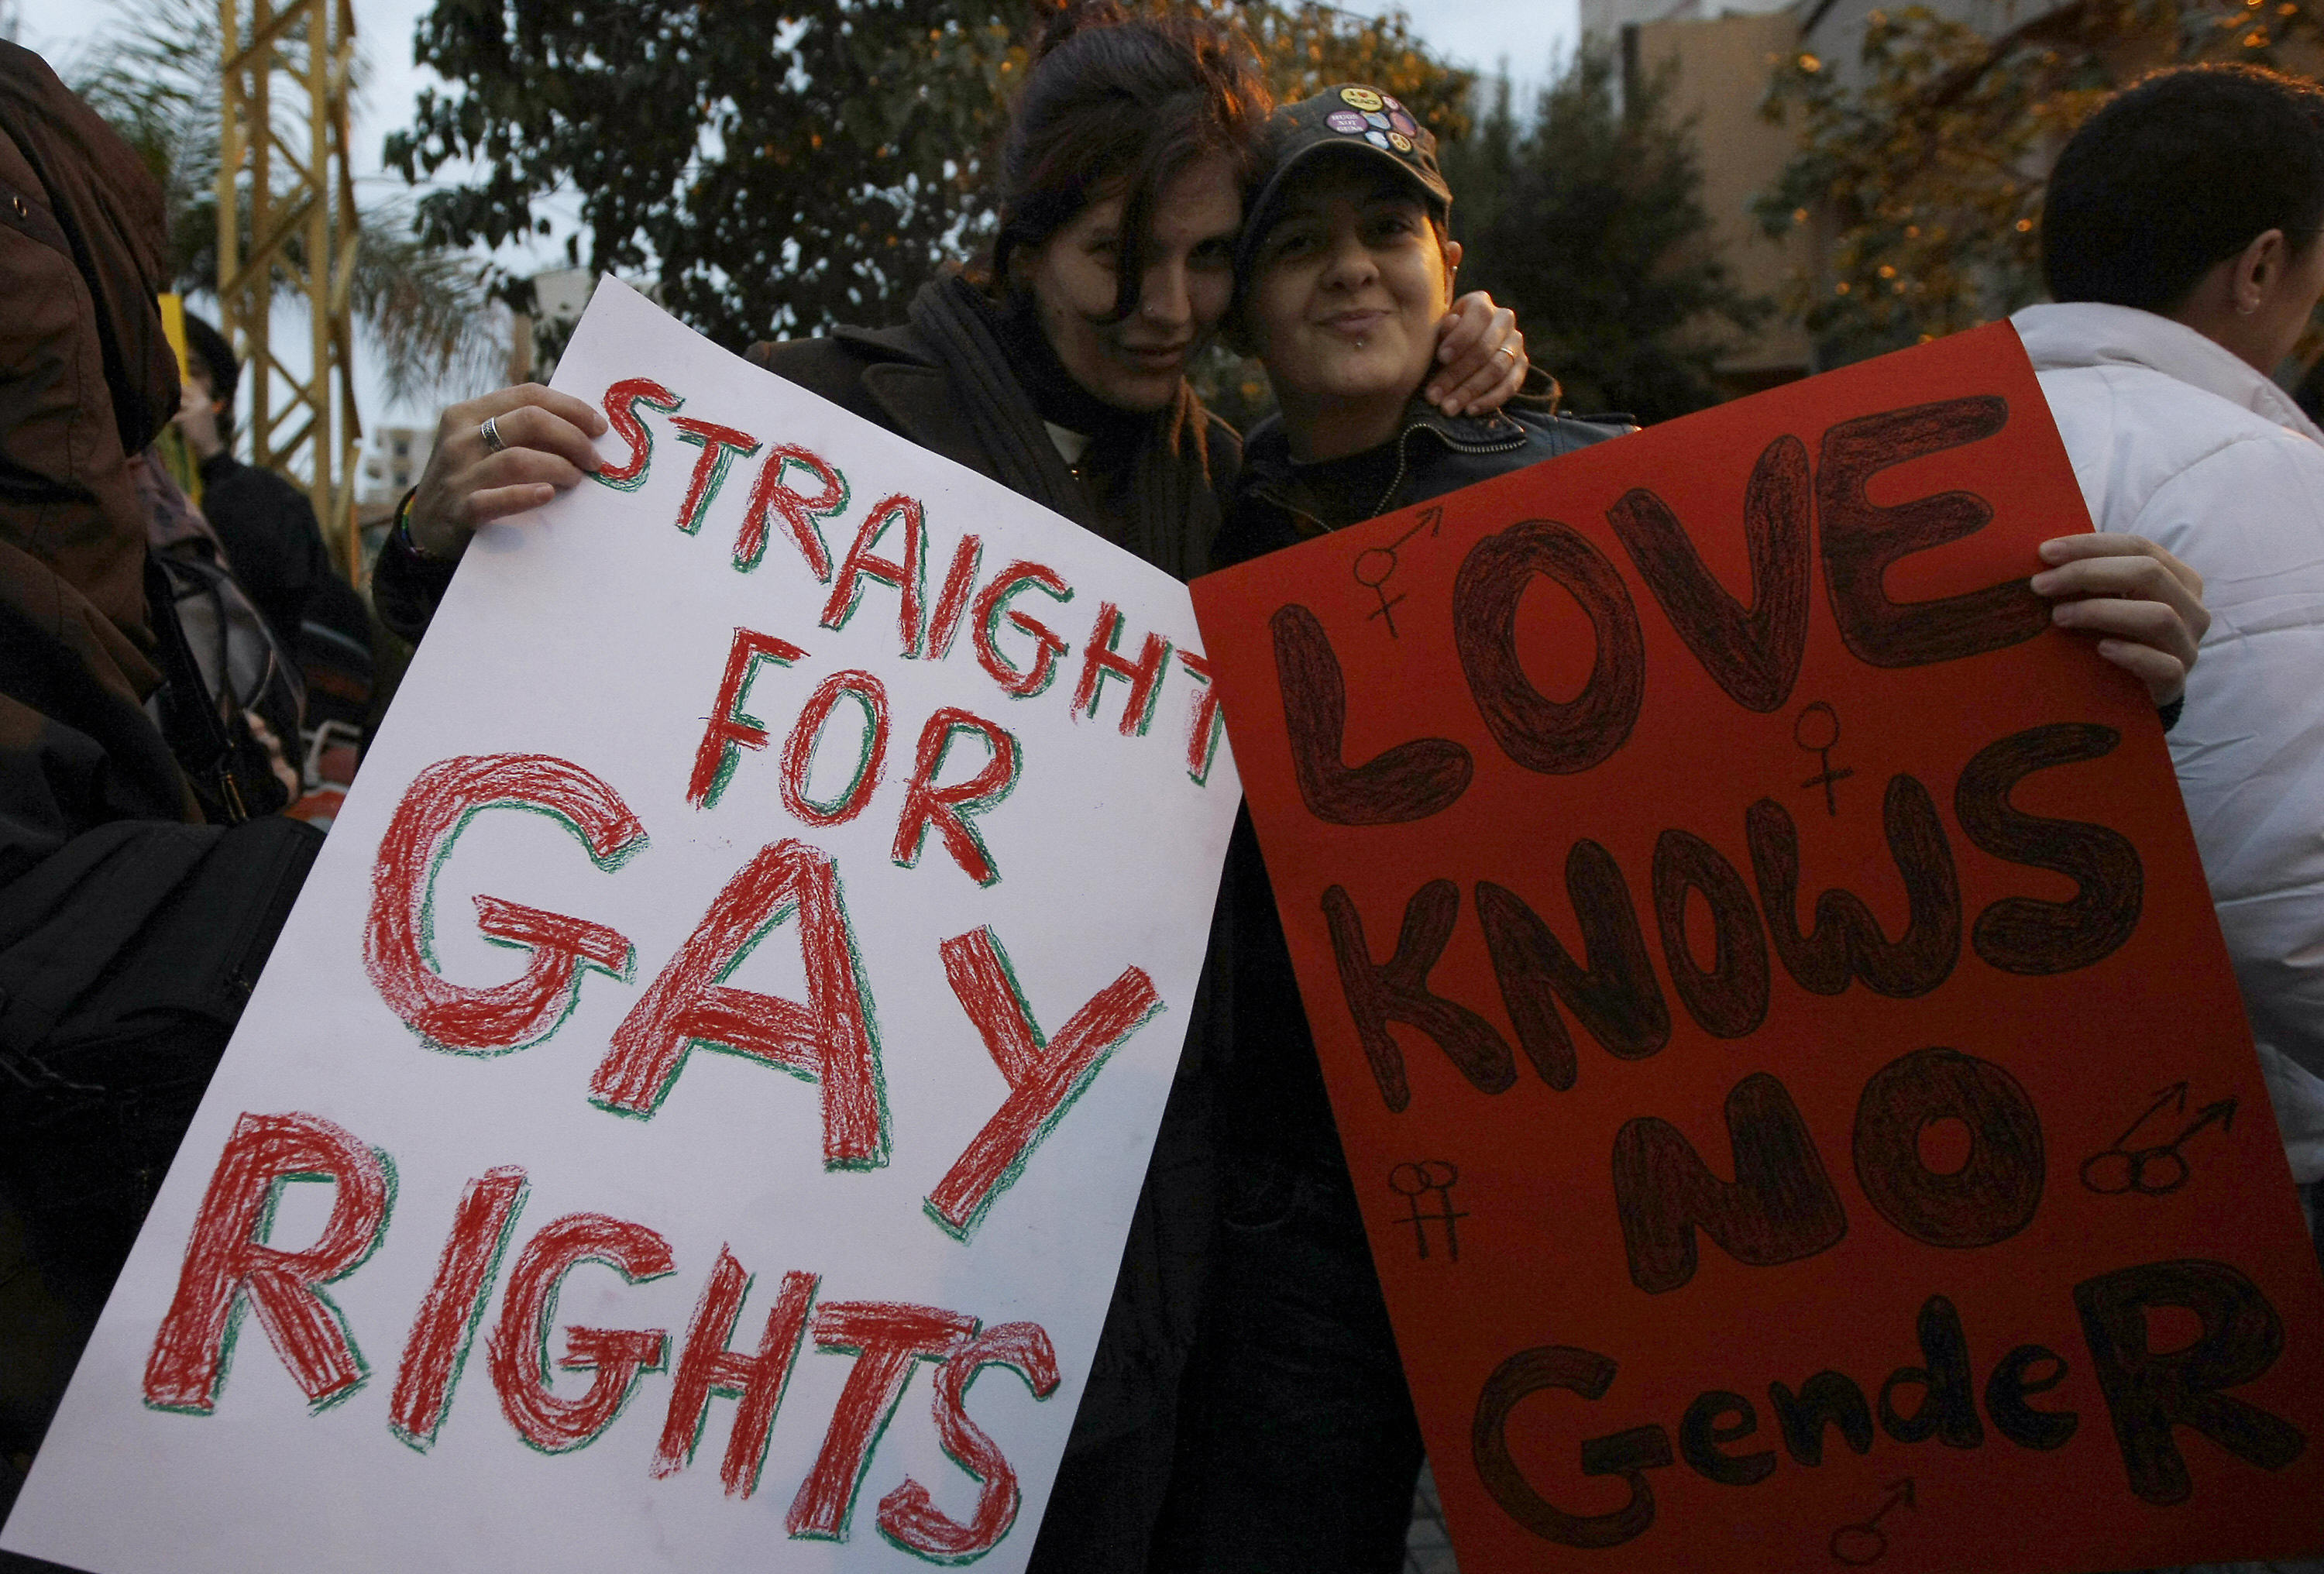 JOSEPH BARRAK/AFP/Getty Images. Lebanese demonstrators hold signs during a protest in Beirut against violence and discrimination in society. The protest, organised by the gay rights association 'Helem' (Dream) and human rights organisations in Lebanon, called for a halt to violence and discrimination against homosexuals, women, children, domestic workers and foreign labourers.